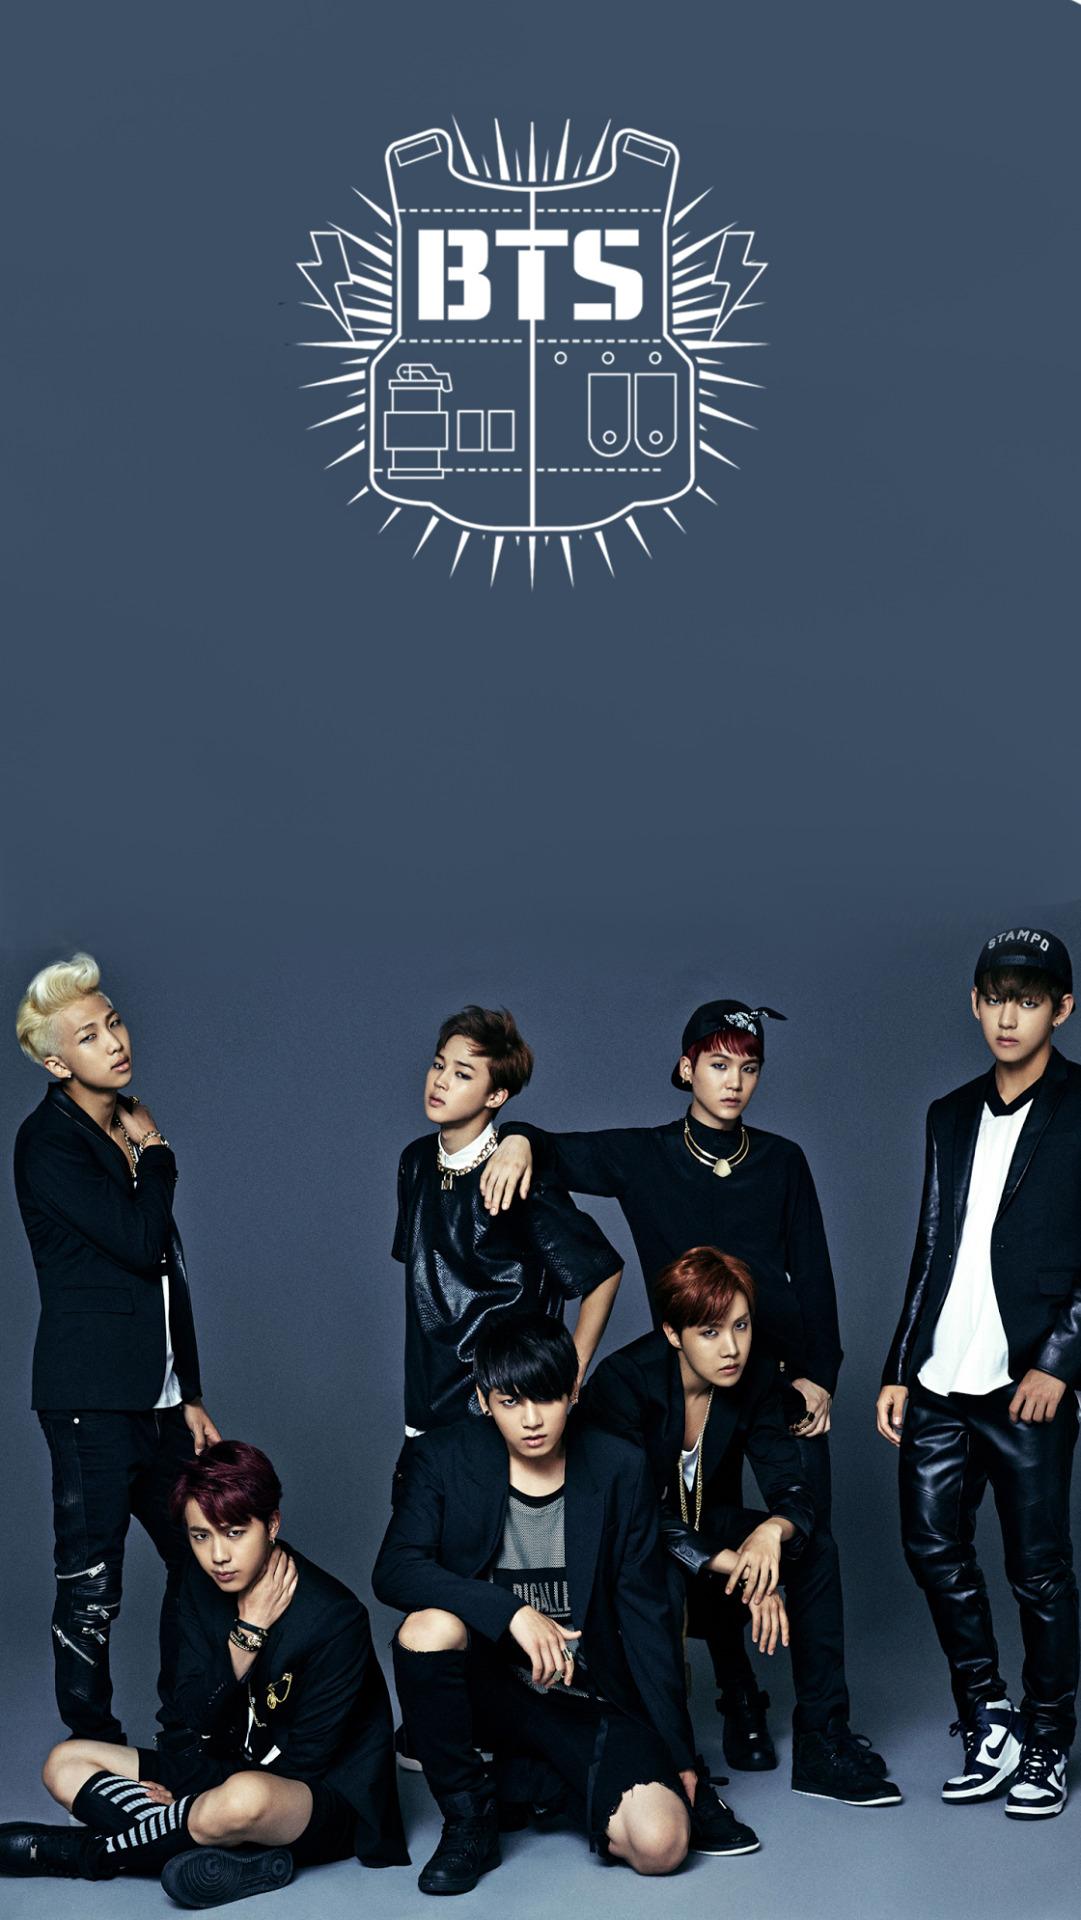 Free download BTS Wallpaper High Quality Download